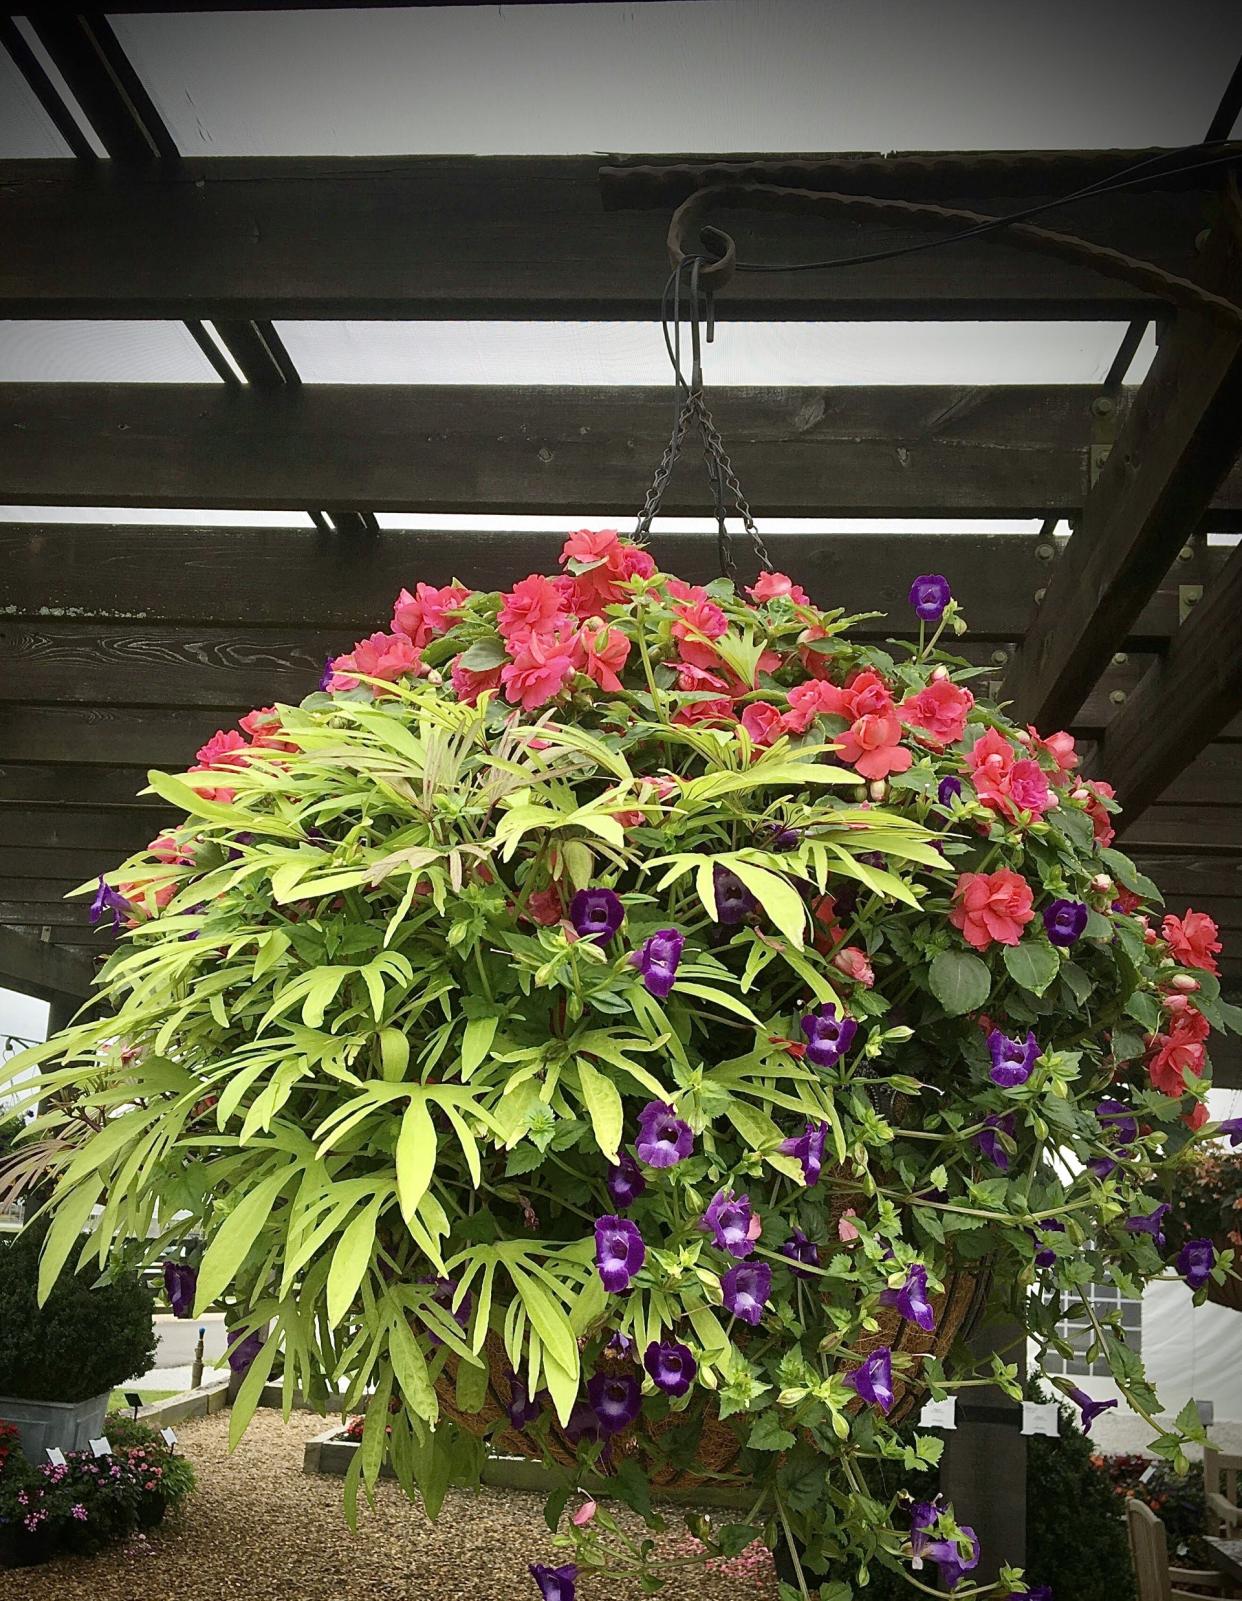 Rockapulco Coral Reef impatiens dazzles in the hanging basket featuring Sweet Caroline Medusa Green sweet potato and Summer Wave Large Violet torenia or wishbone flower.